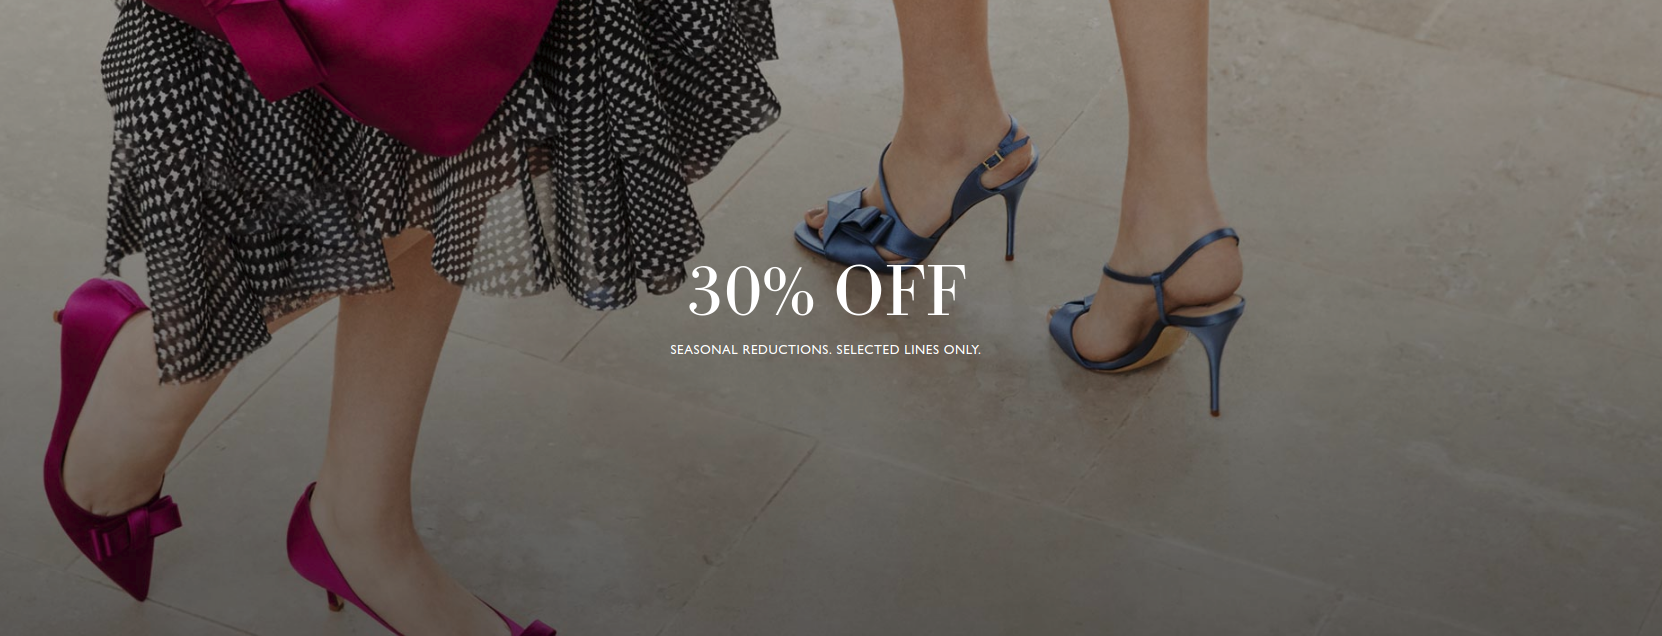 L.K.Bennett: 30% off selected clothing, shoes, bags and accessories